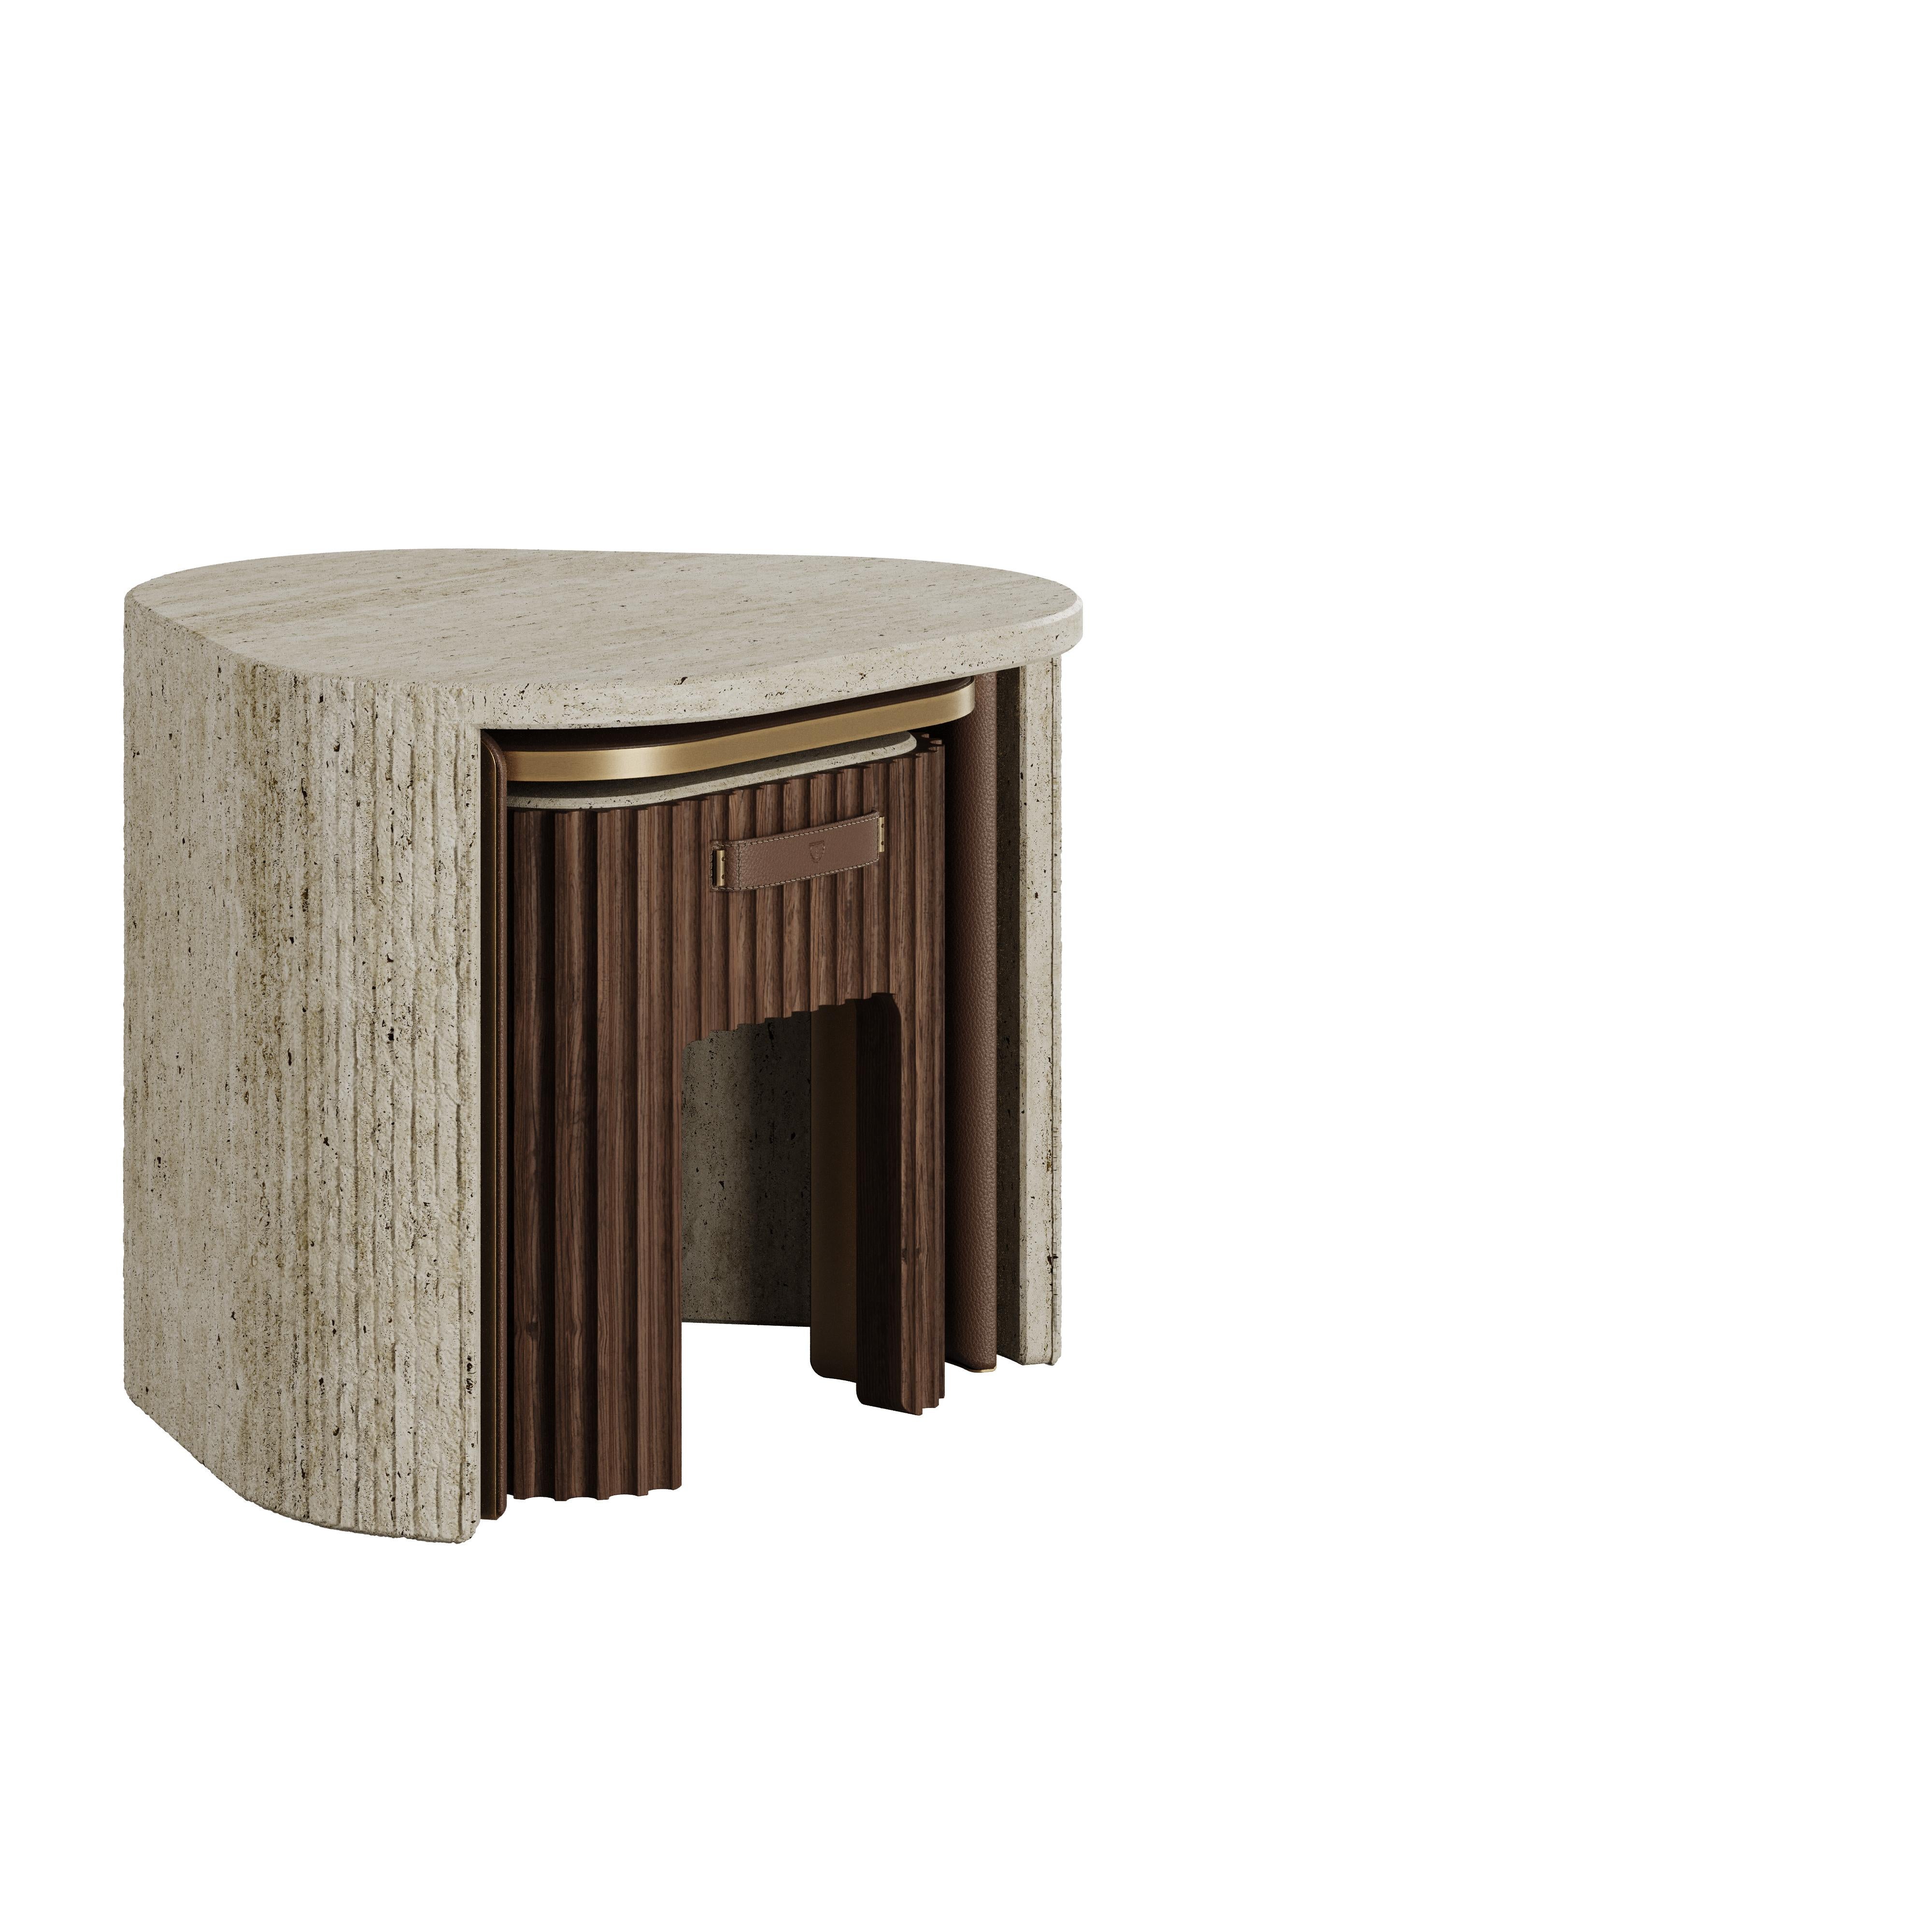 Contemporary 21st Century Henley Side Table Wood Travertine Brass by Wood Tailors For Sale